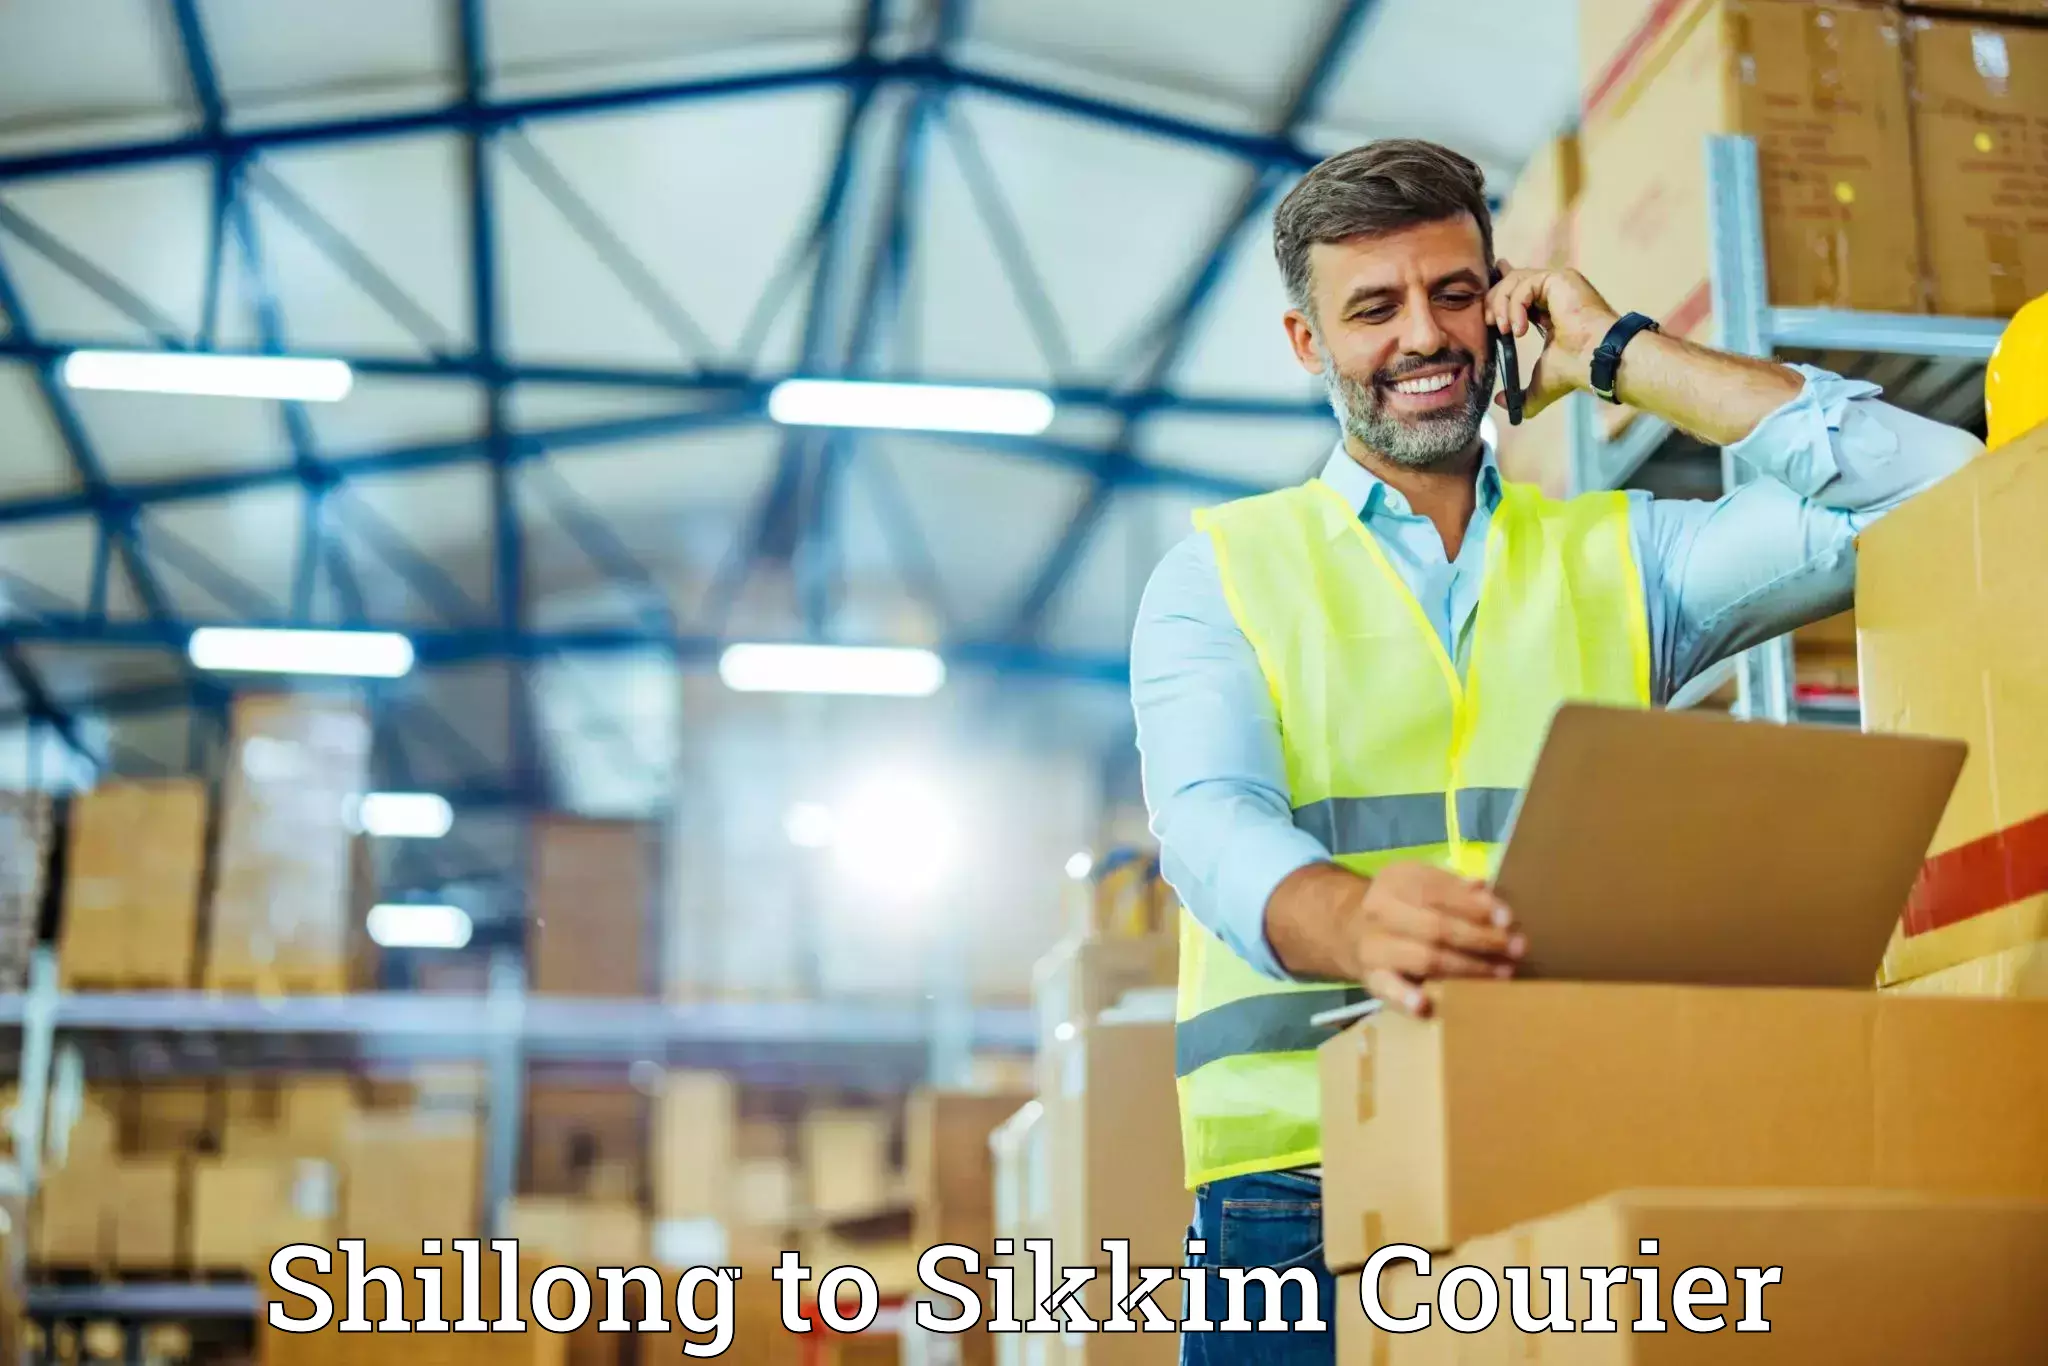 Furniture delivery service Shillong to North Sikkim